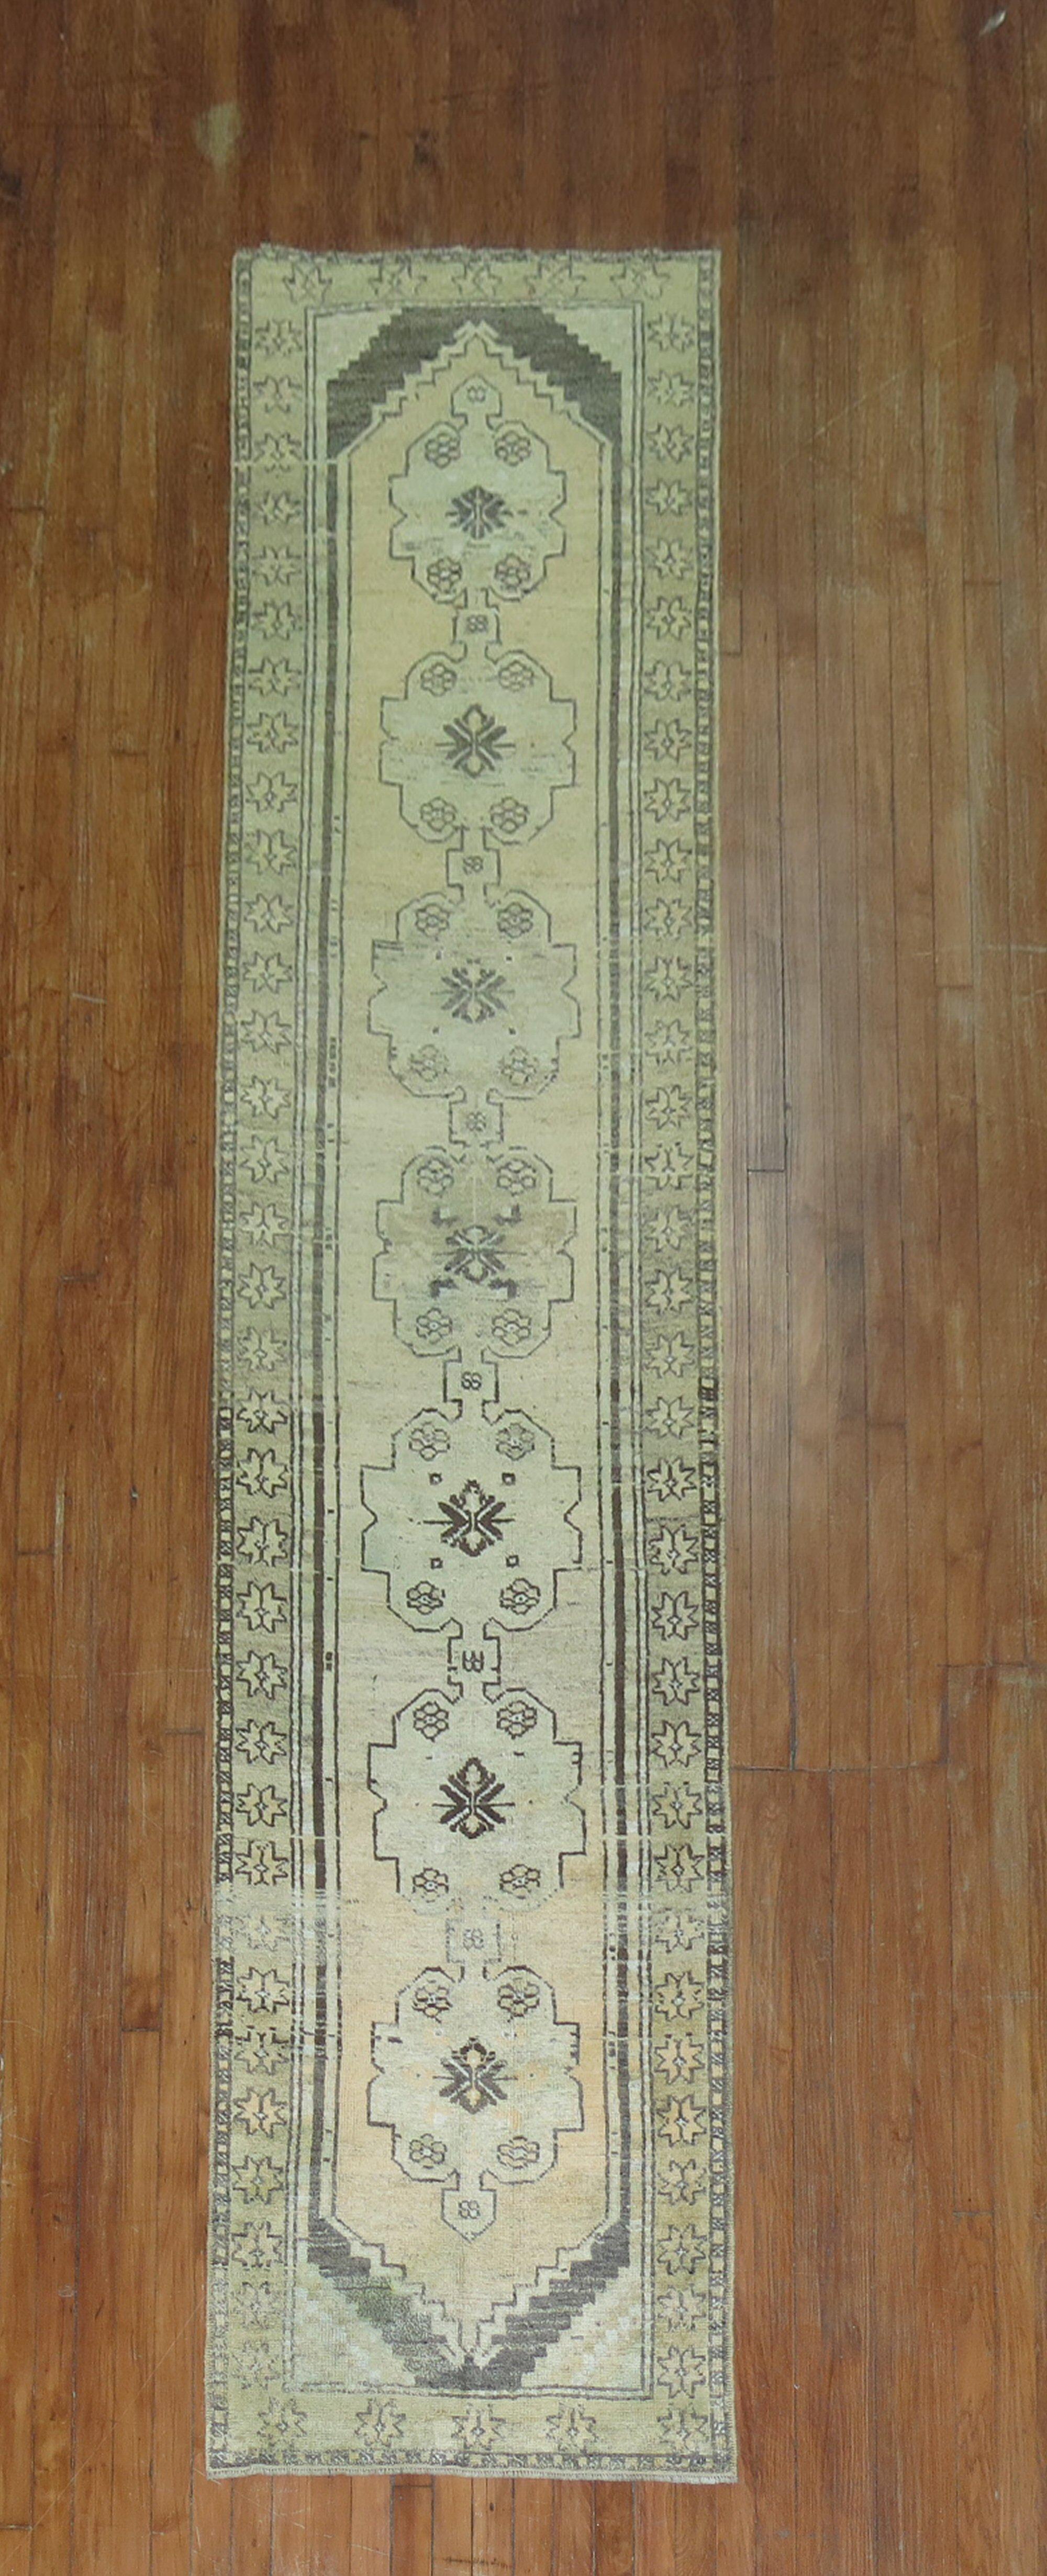 Midcentury one of a kind Turkish Oushak runner

Measures: 2'6'' x 11'2''.